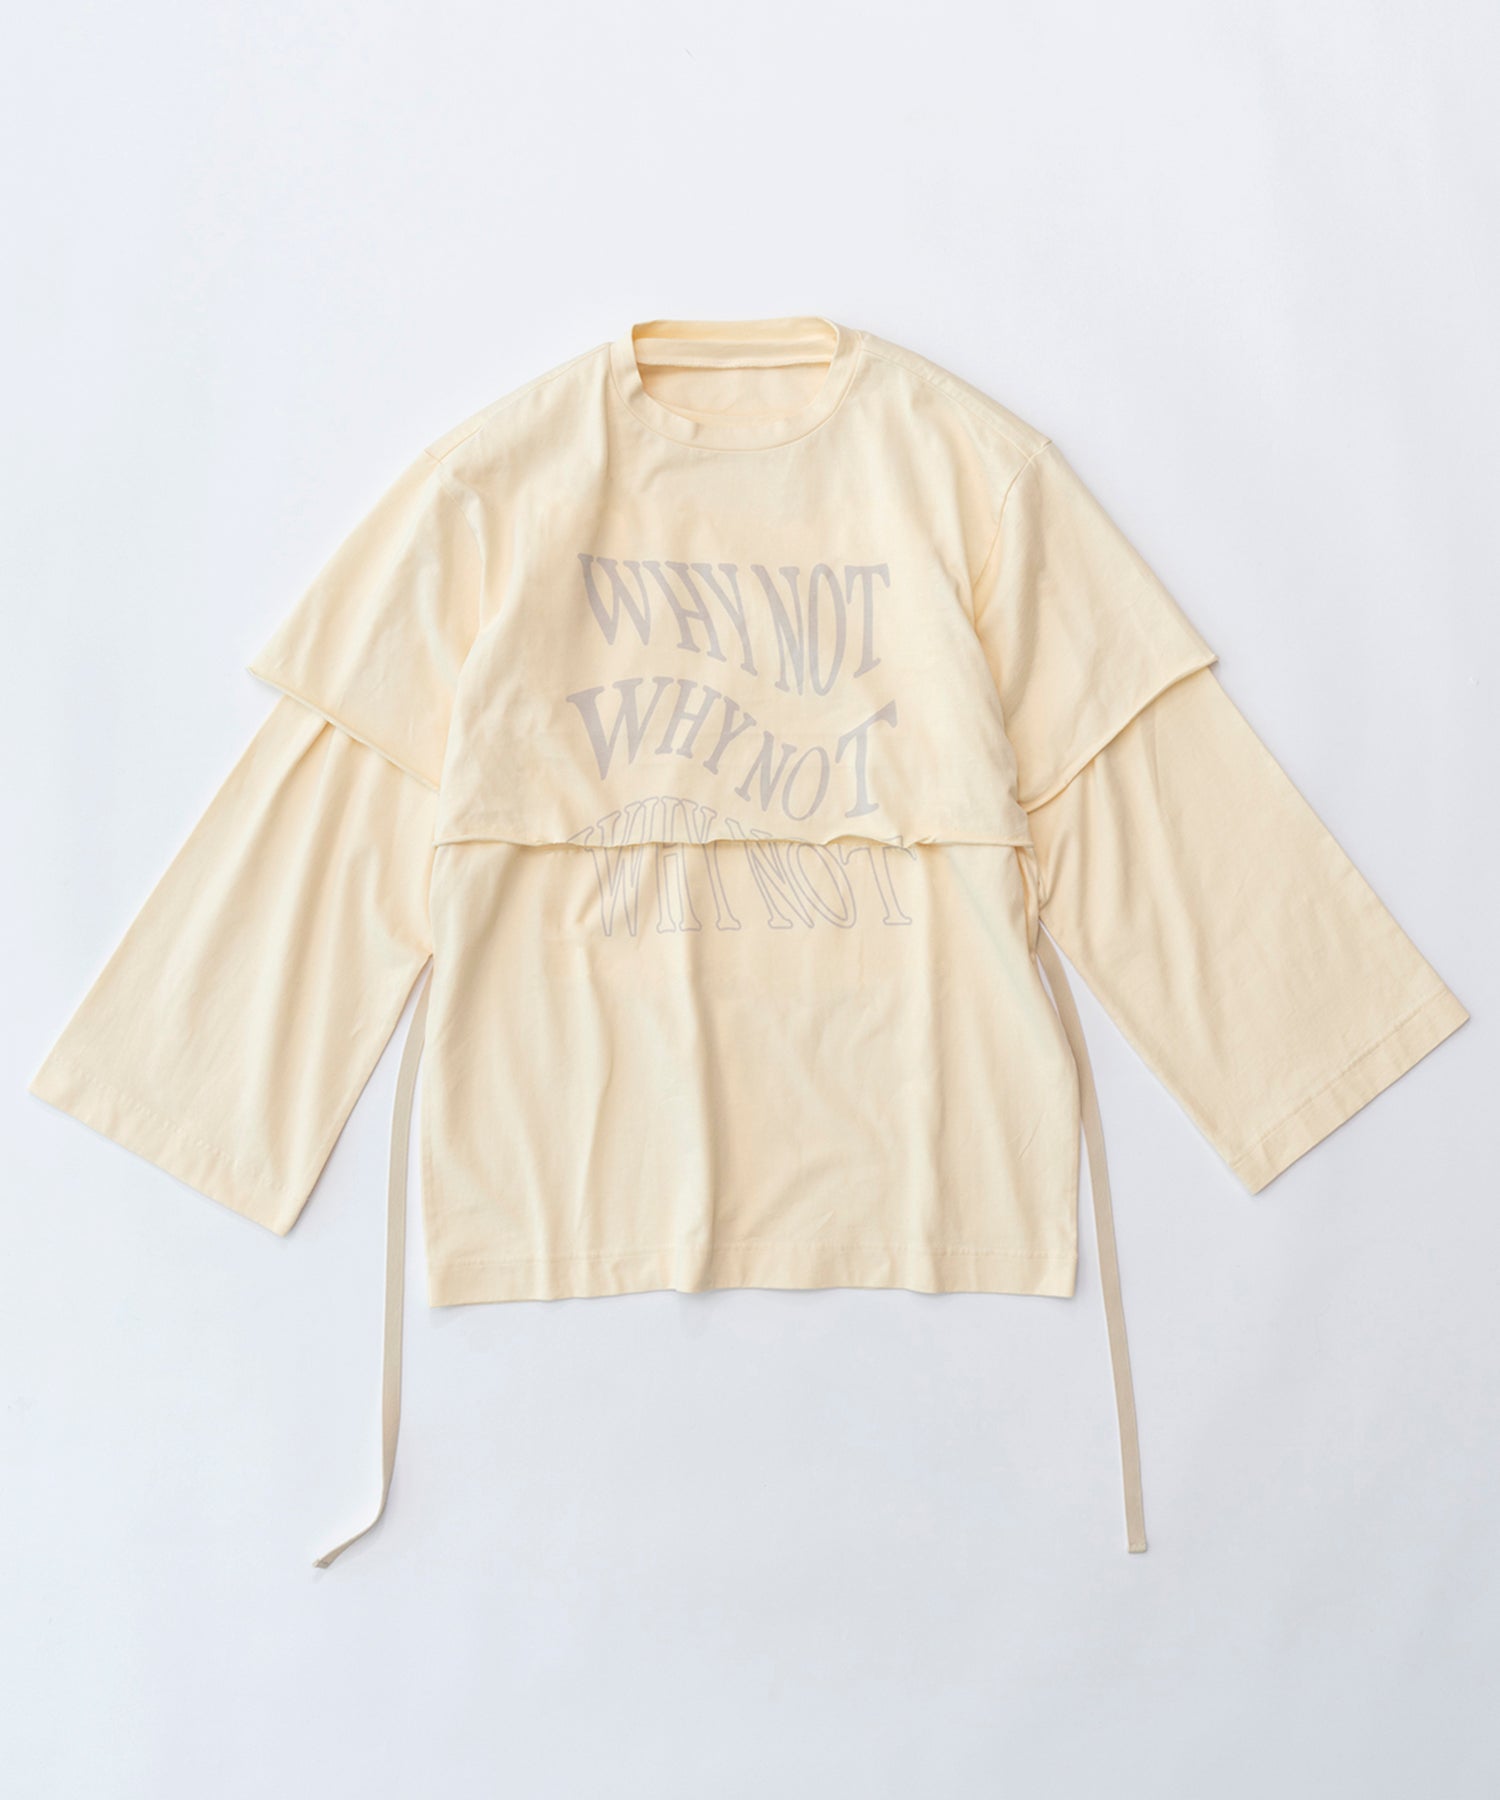 SALE】WHY NOT Layered Long T-shirt